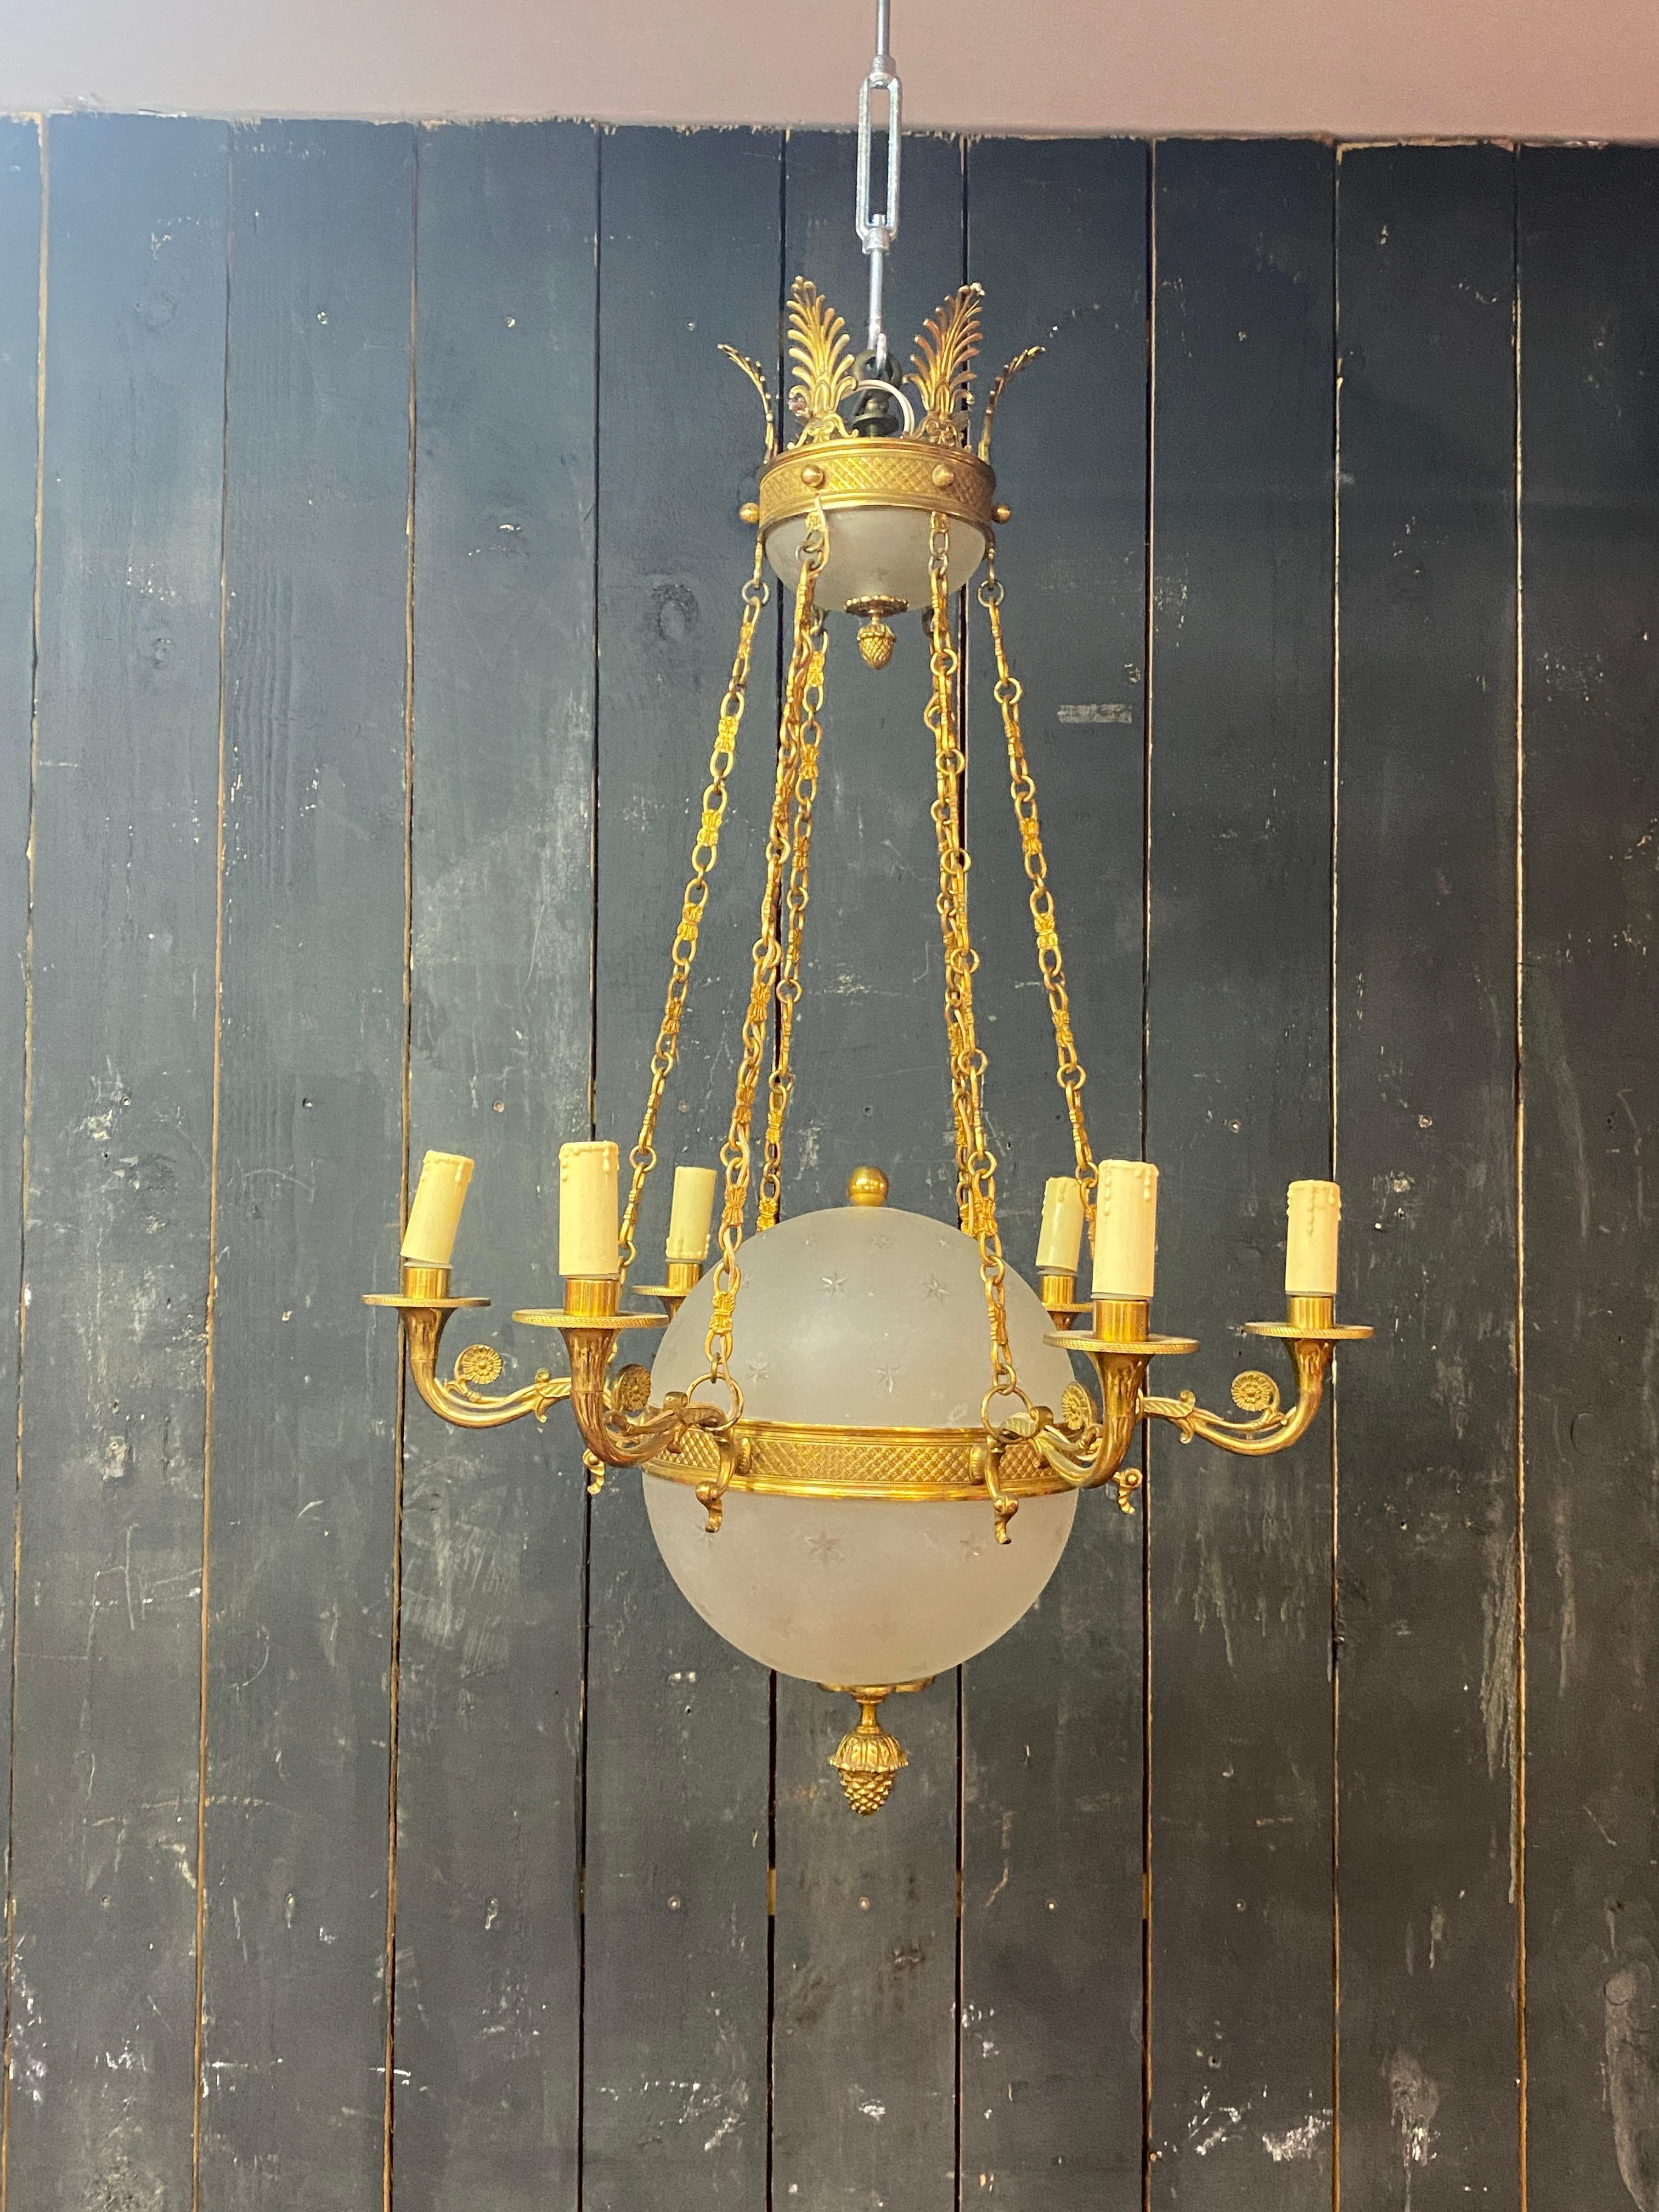 old chandelier in bronze and frosted glass decorated with engraved stars.
Very good quality
